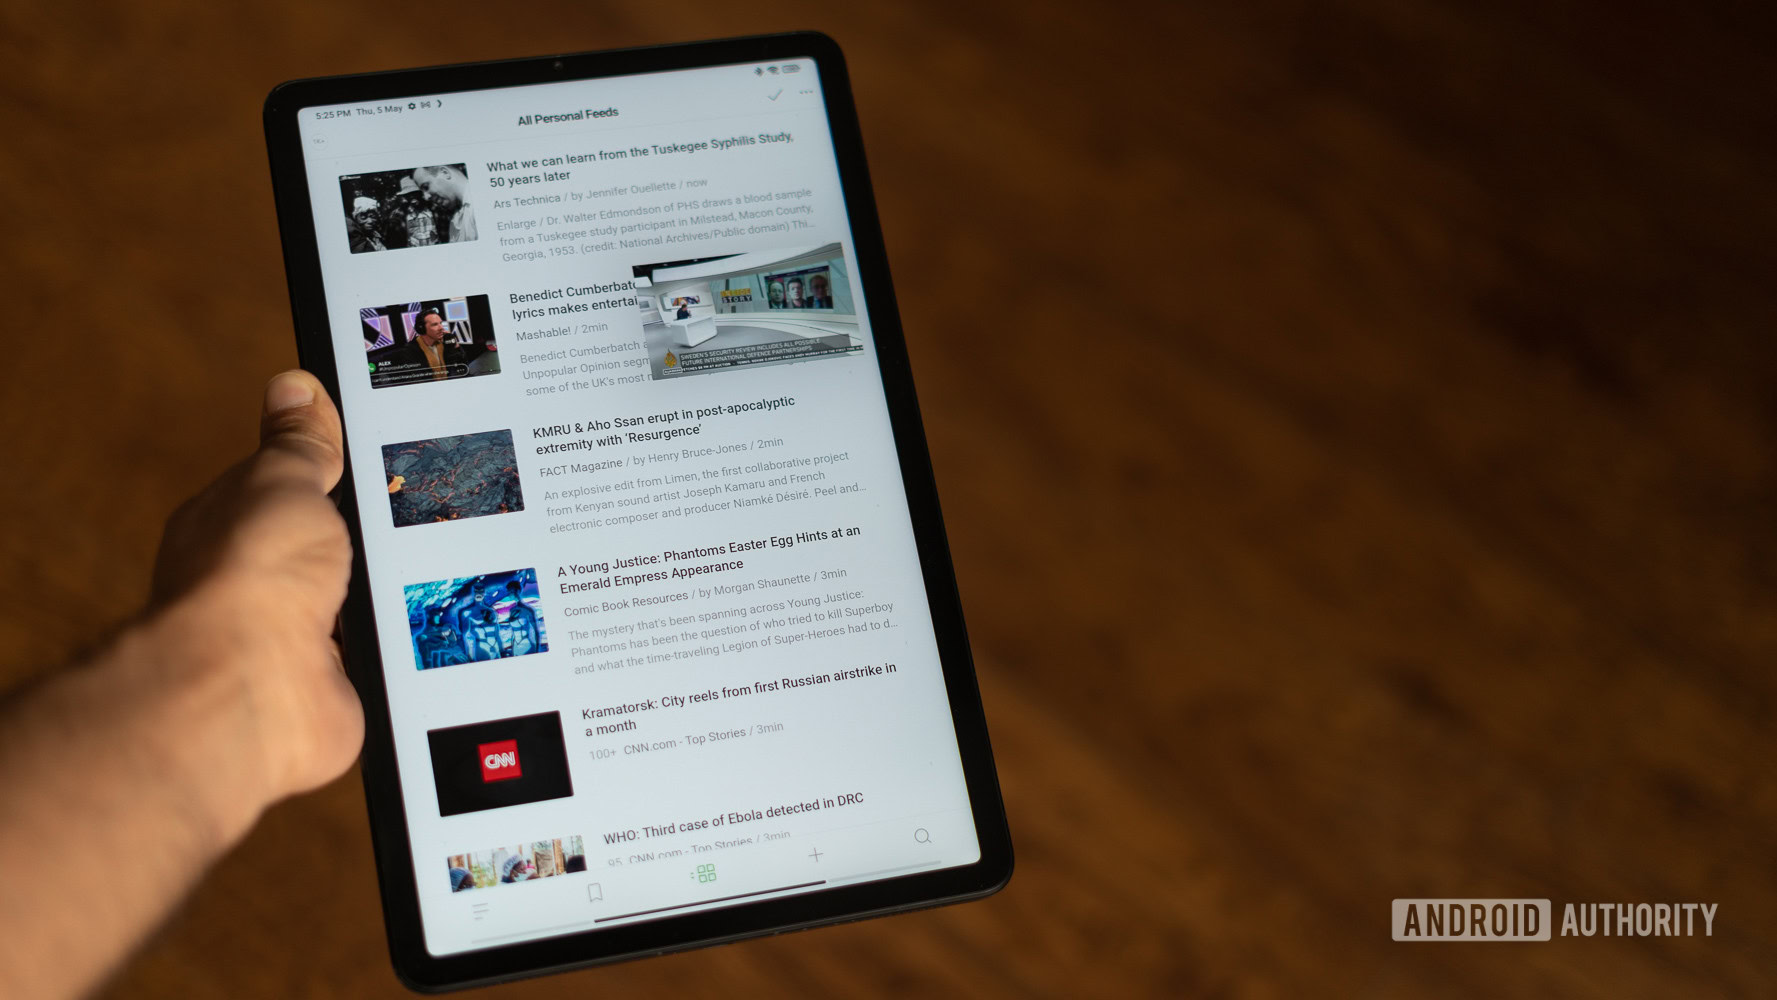 Xiaomi Pad 5 in hand shows news feed